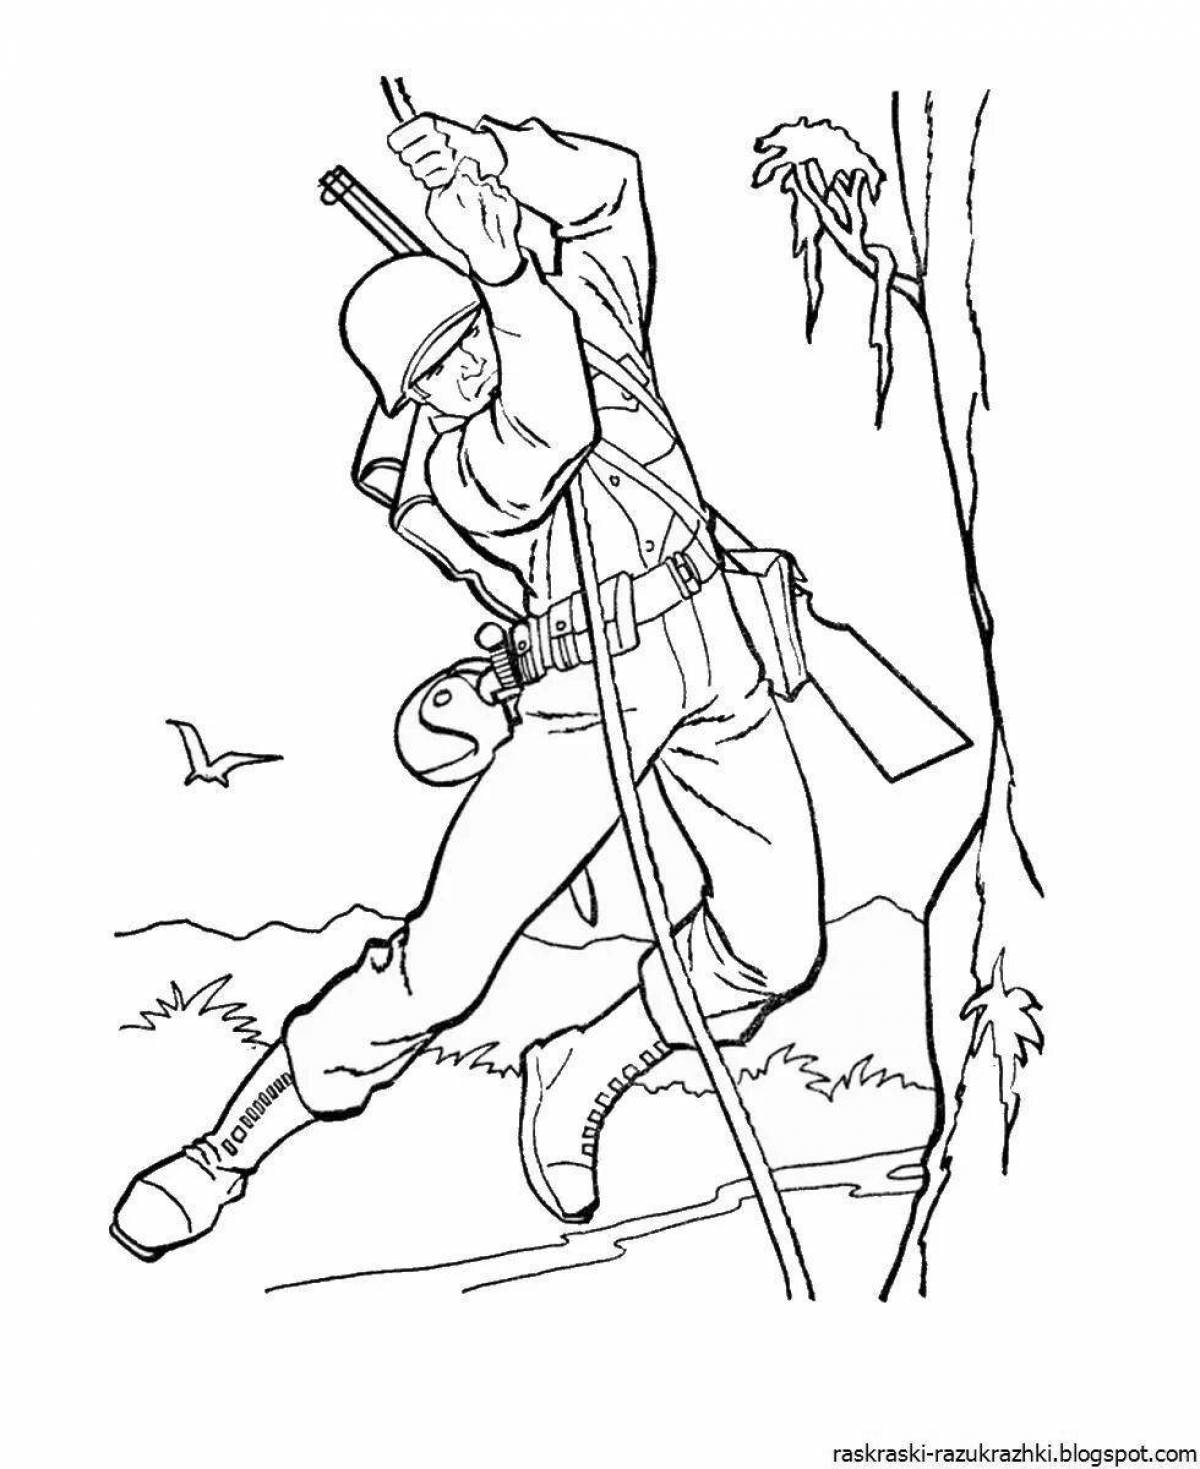 Shining soldier coloring pages for boys